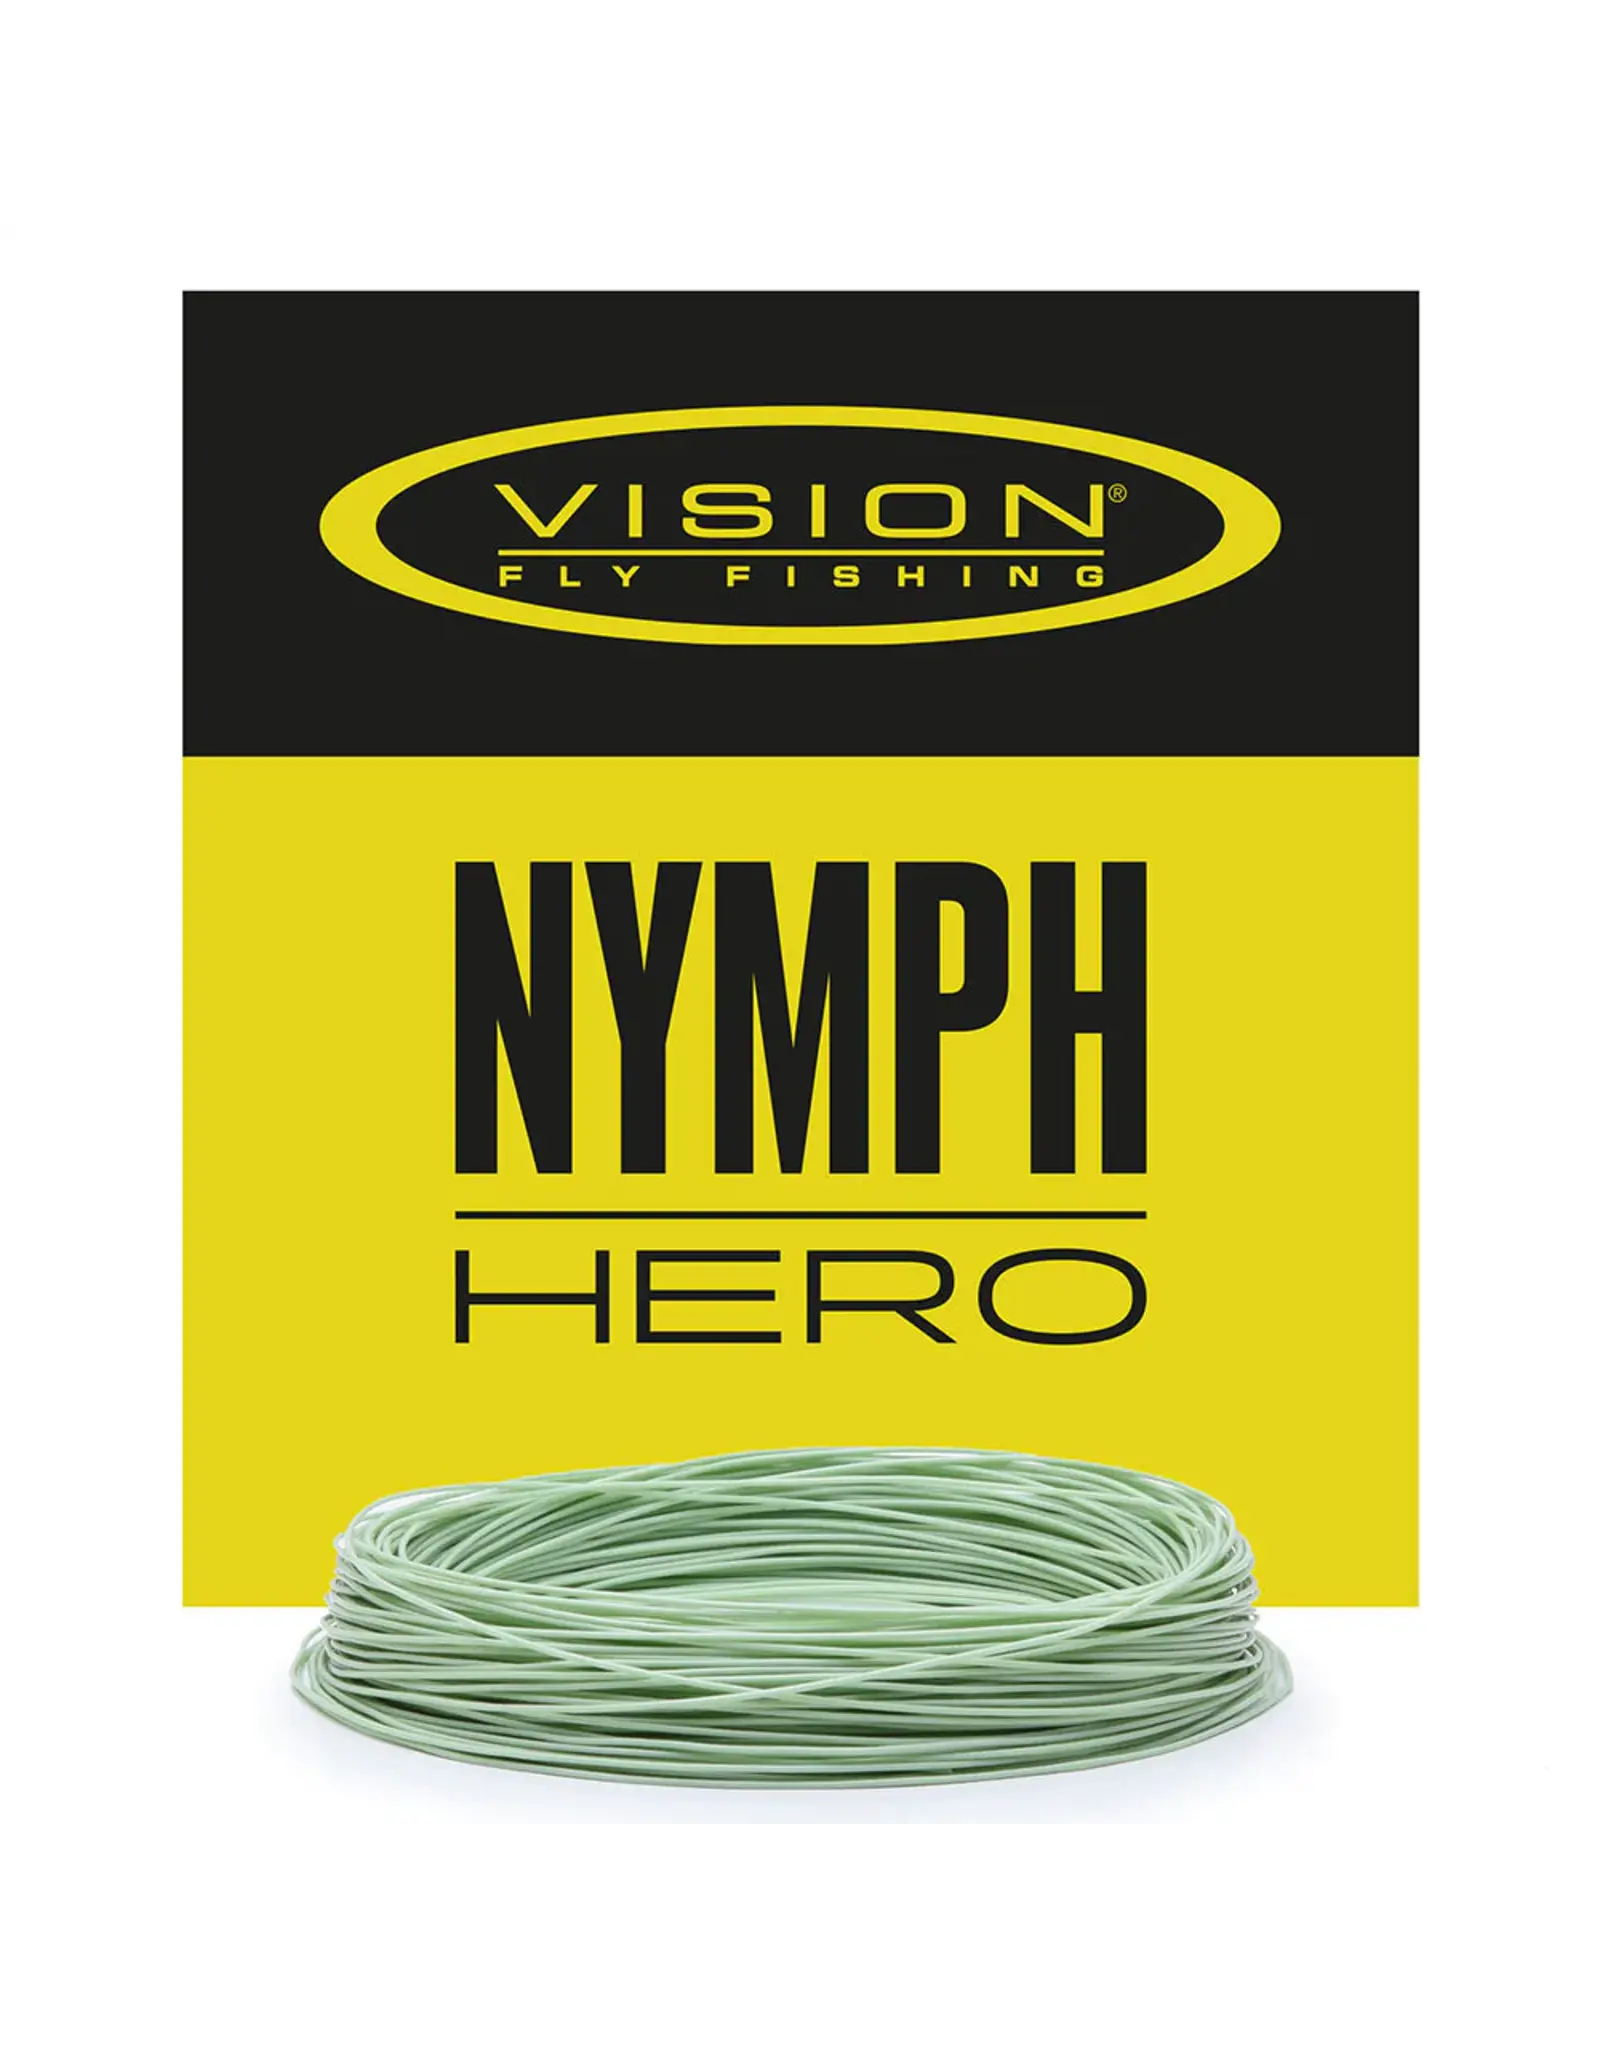 VISION FLY FISHING HERO NYMPH LINE